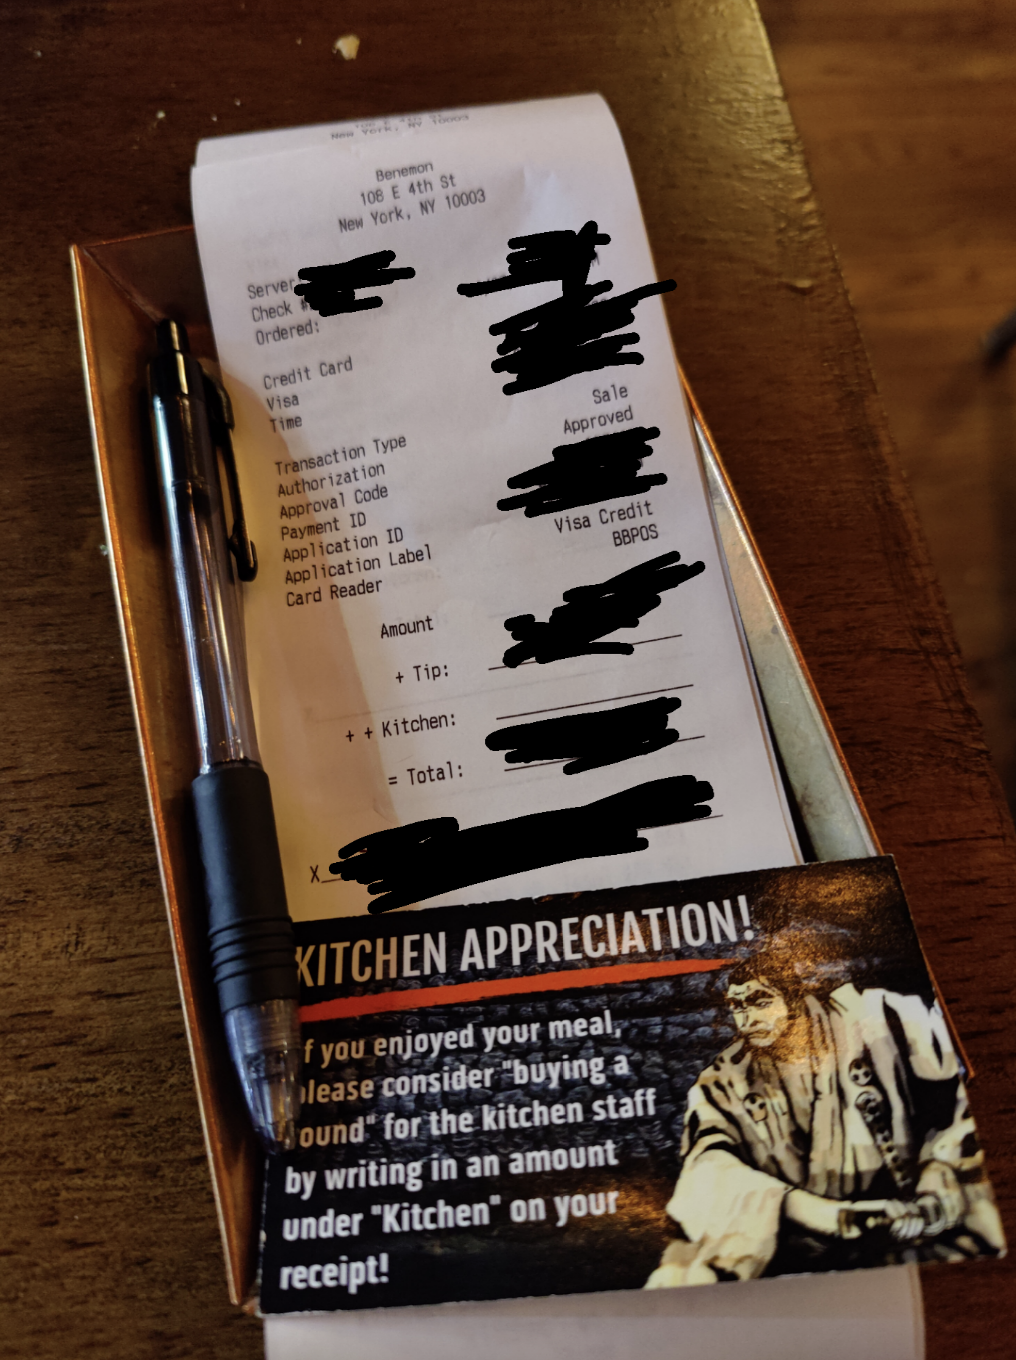 Restaurant receipt with handwritten tip and total amount on wood table, pen aside, note suggesting a tip for kitchen staff